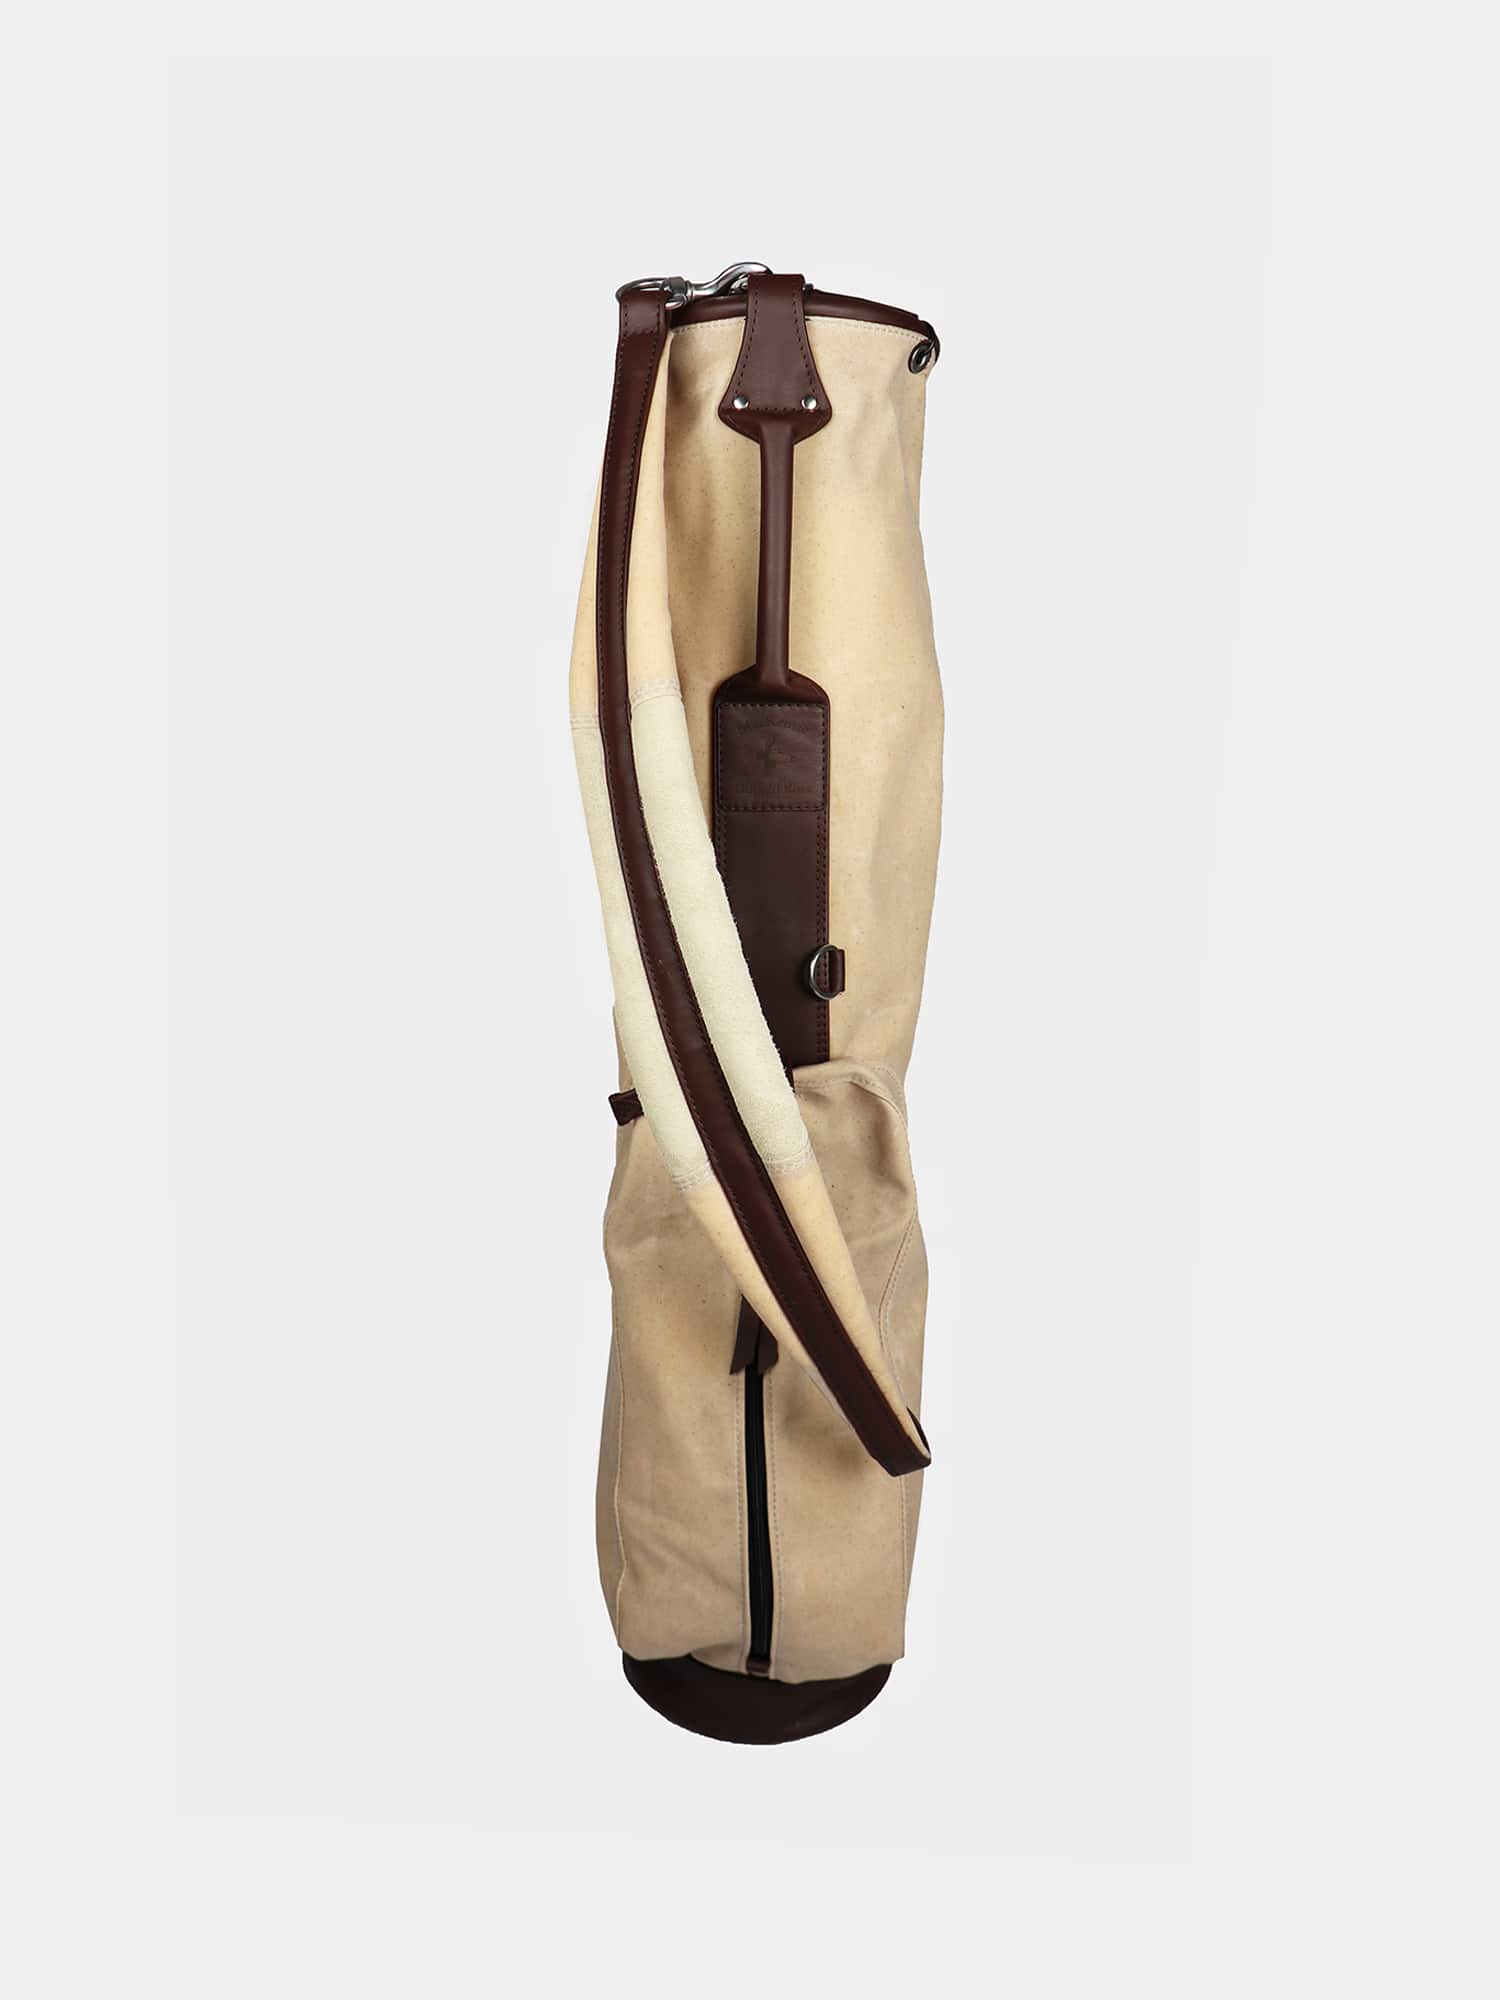 Geoffrey  Vintage TAN Leather Golf Club Carrying Bag with 2 Pockets   Retro  Bag only  Amazonin Sports Fitness  Outdoors